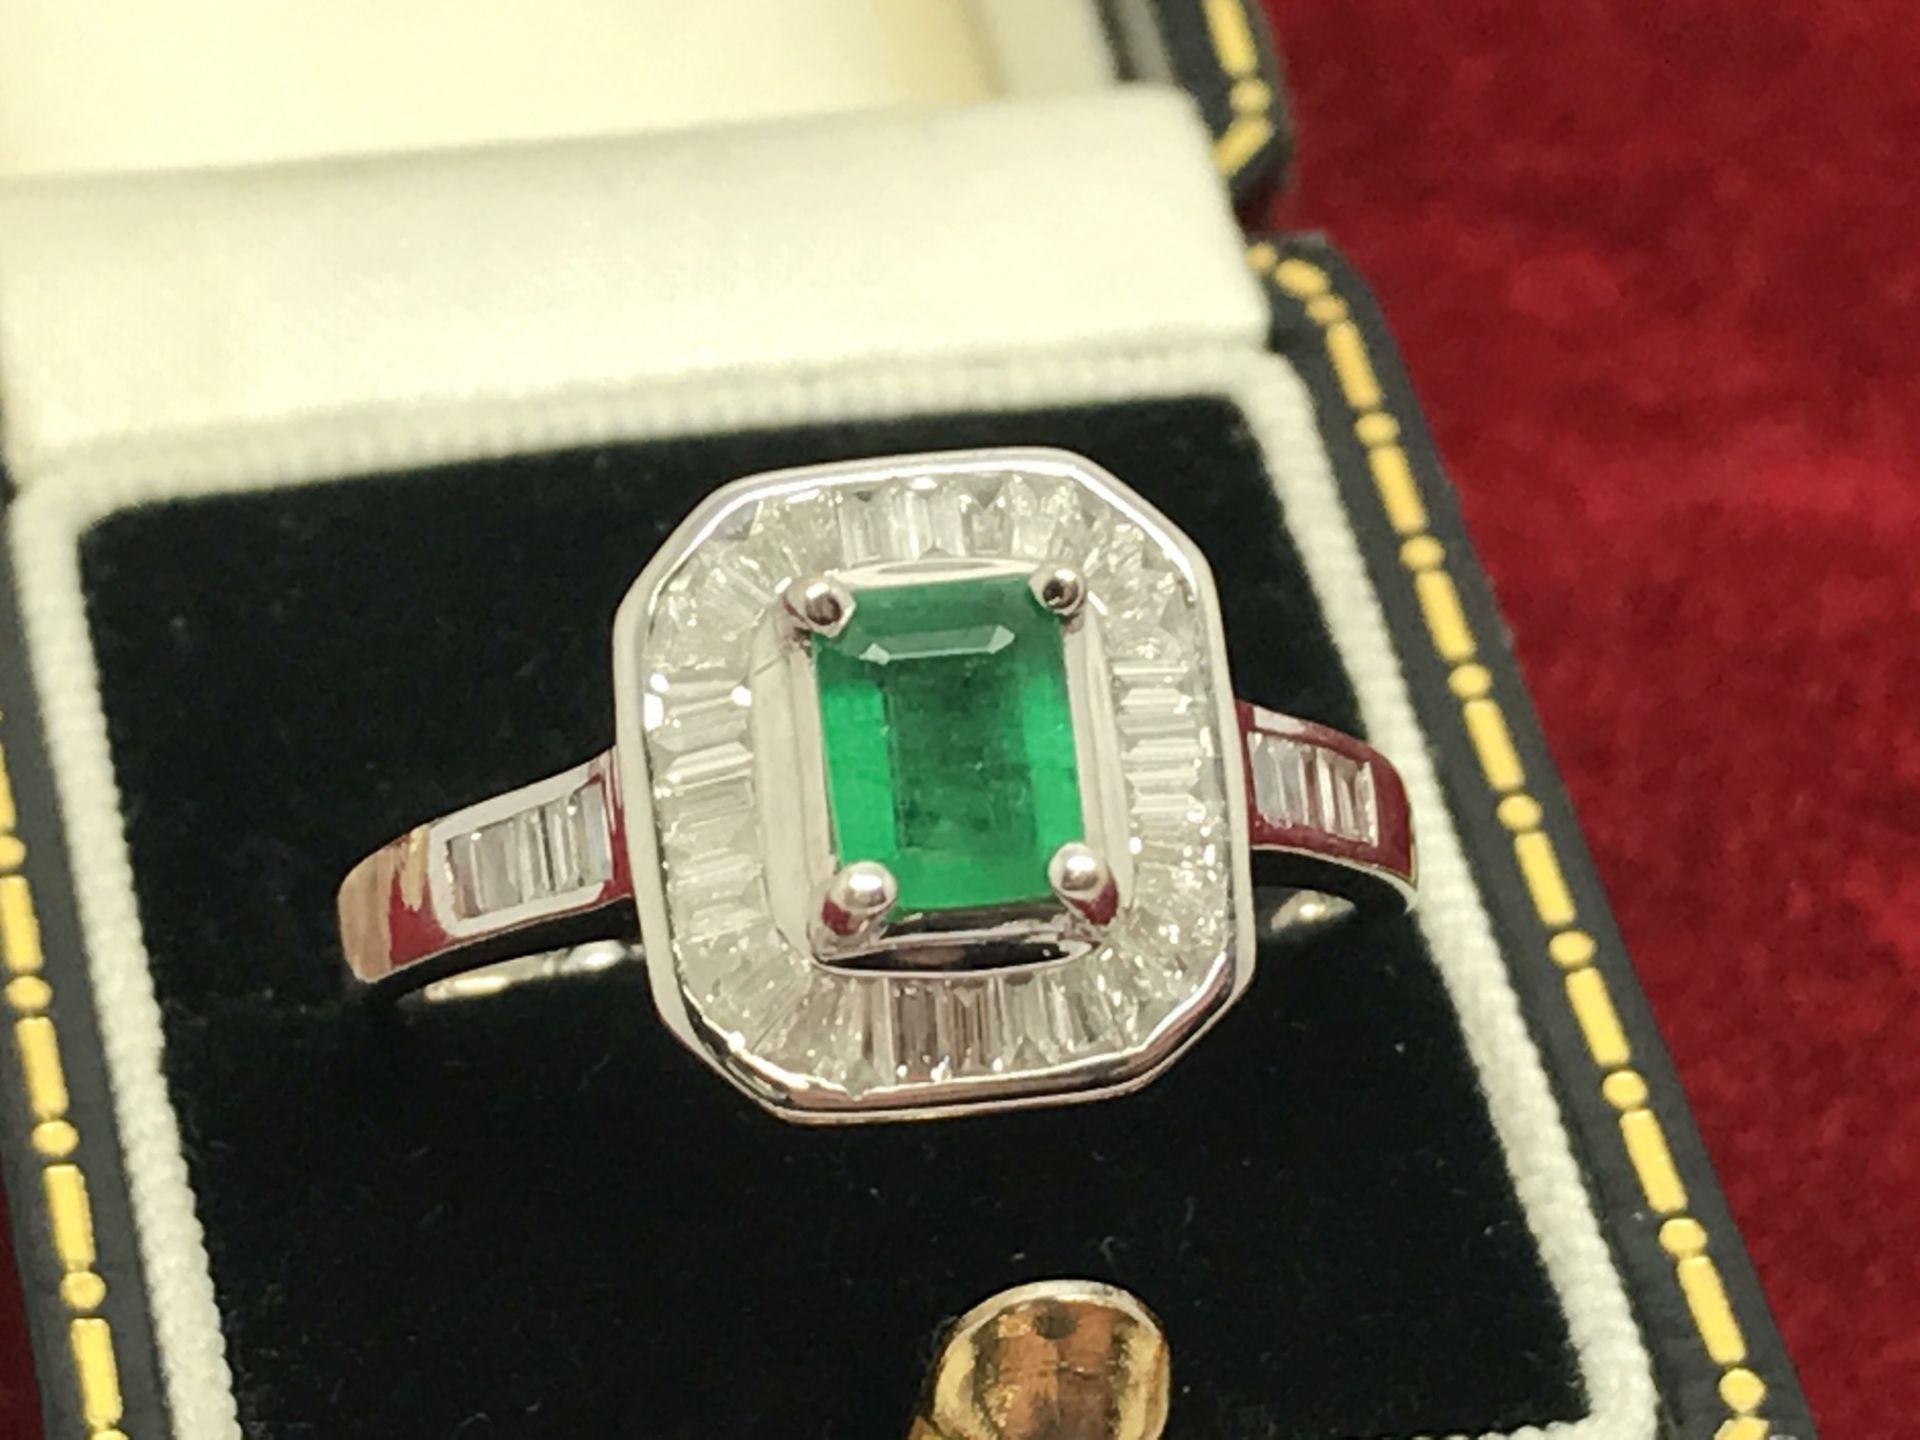 EMERALD & DIAMOND RING SET IN YELLOW METAL TESTED AS 18ct GOLD - Image 2 of 3